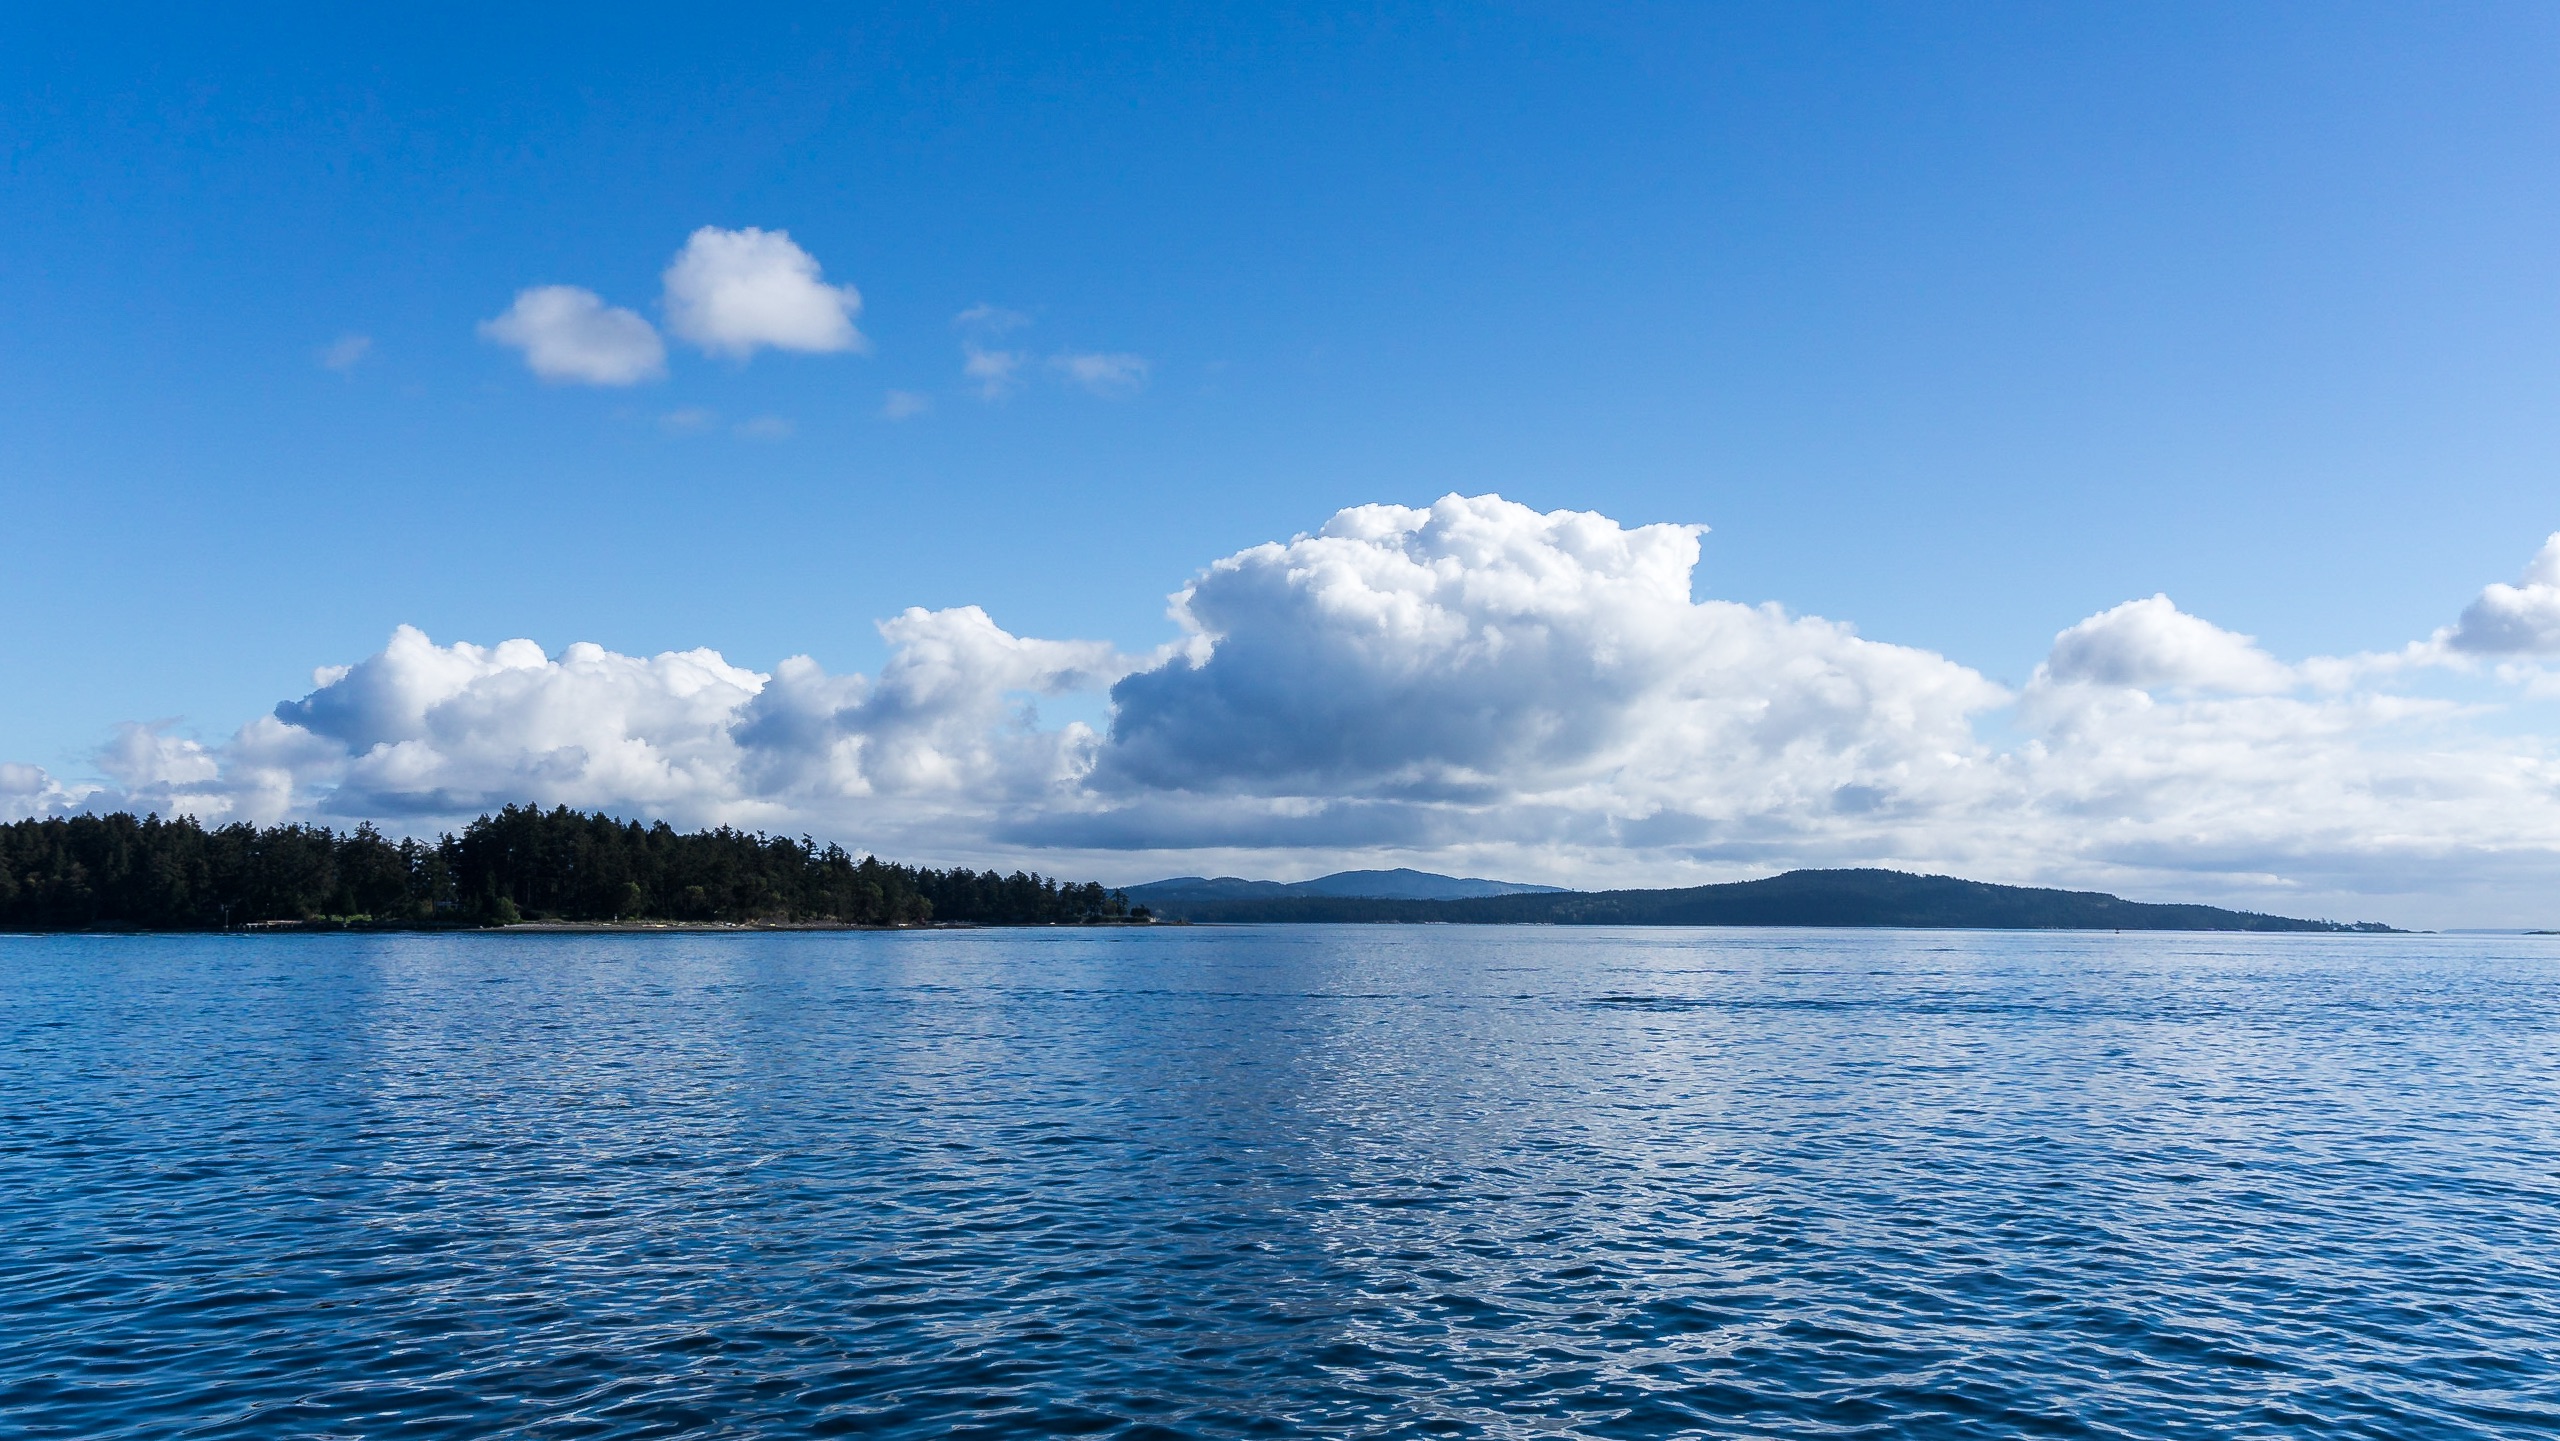 View from the BC Ferry via Swartz Bay-Fulford Harbour route